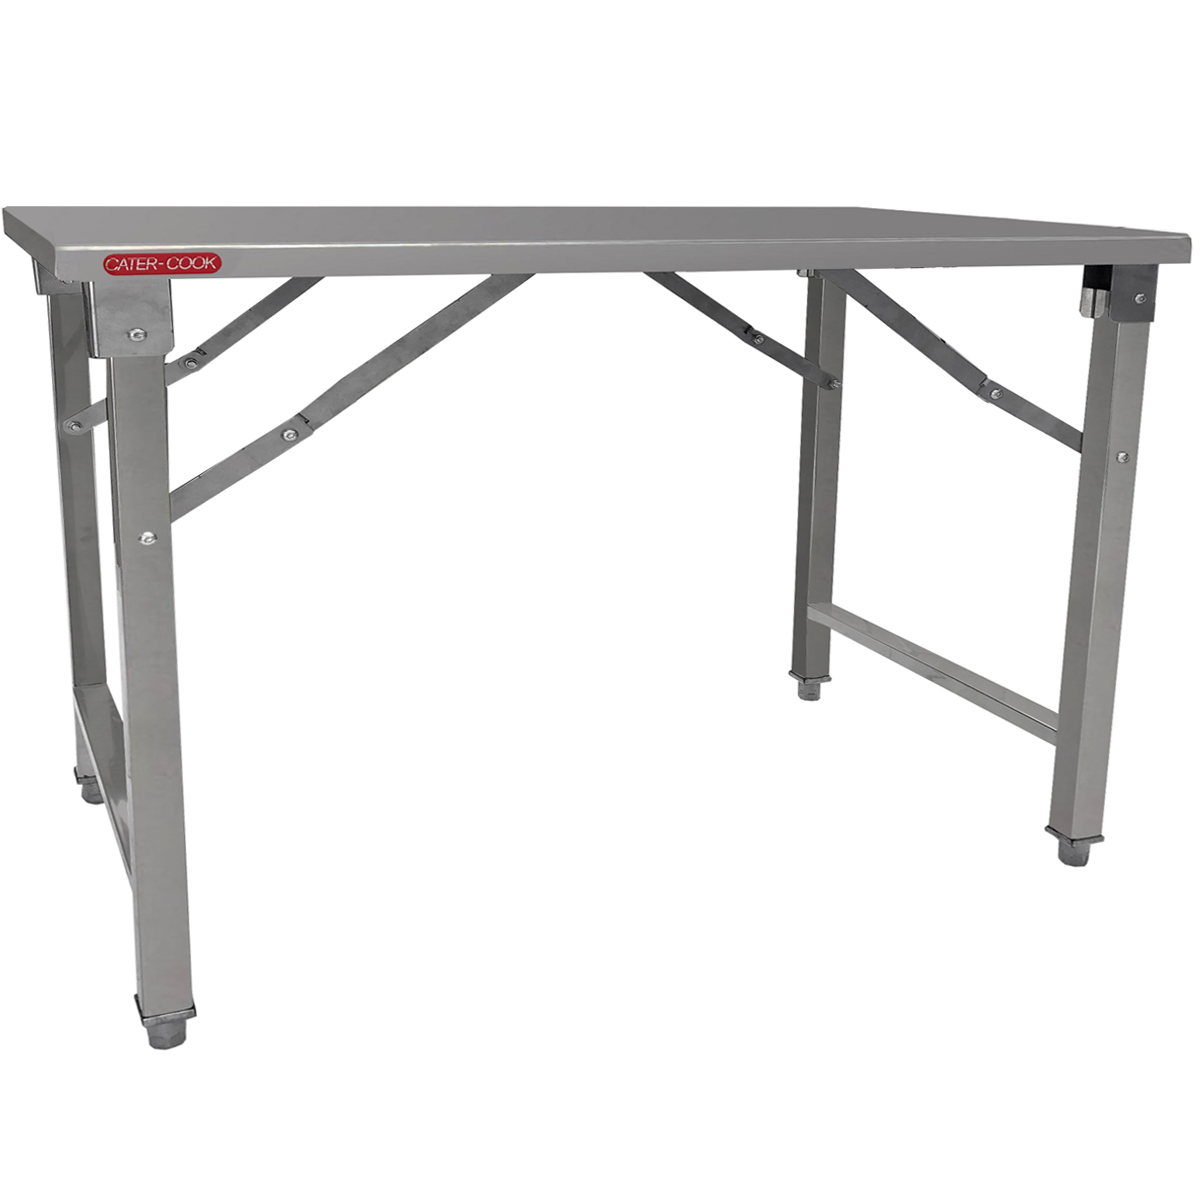 Cater-Cook Stainless Steel Folding Table - 1500 x 600 x 850mm - CK8568